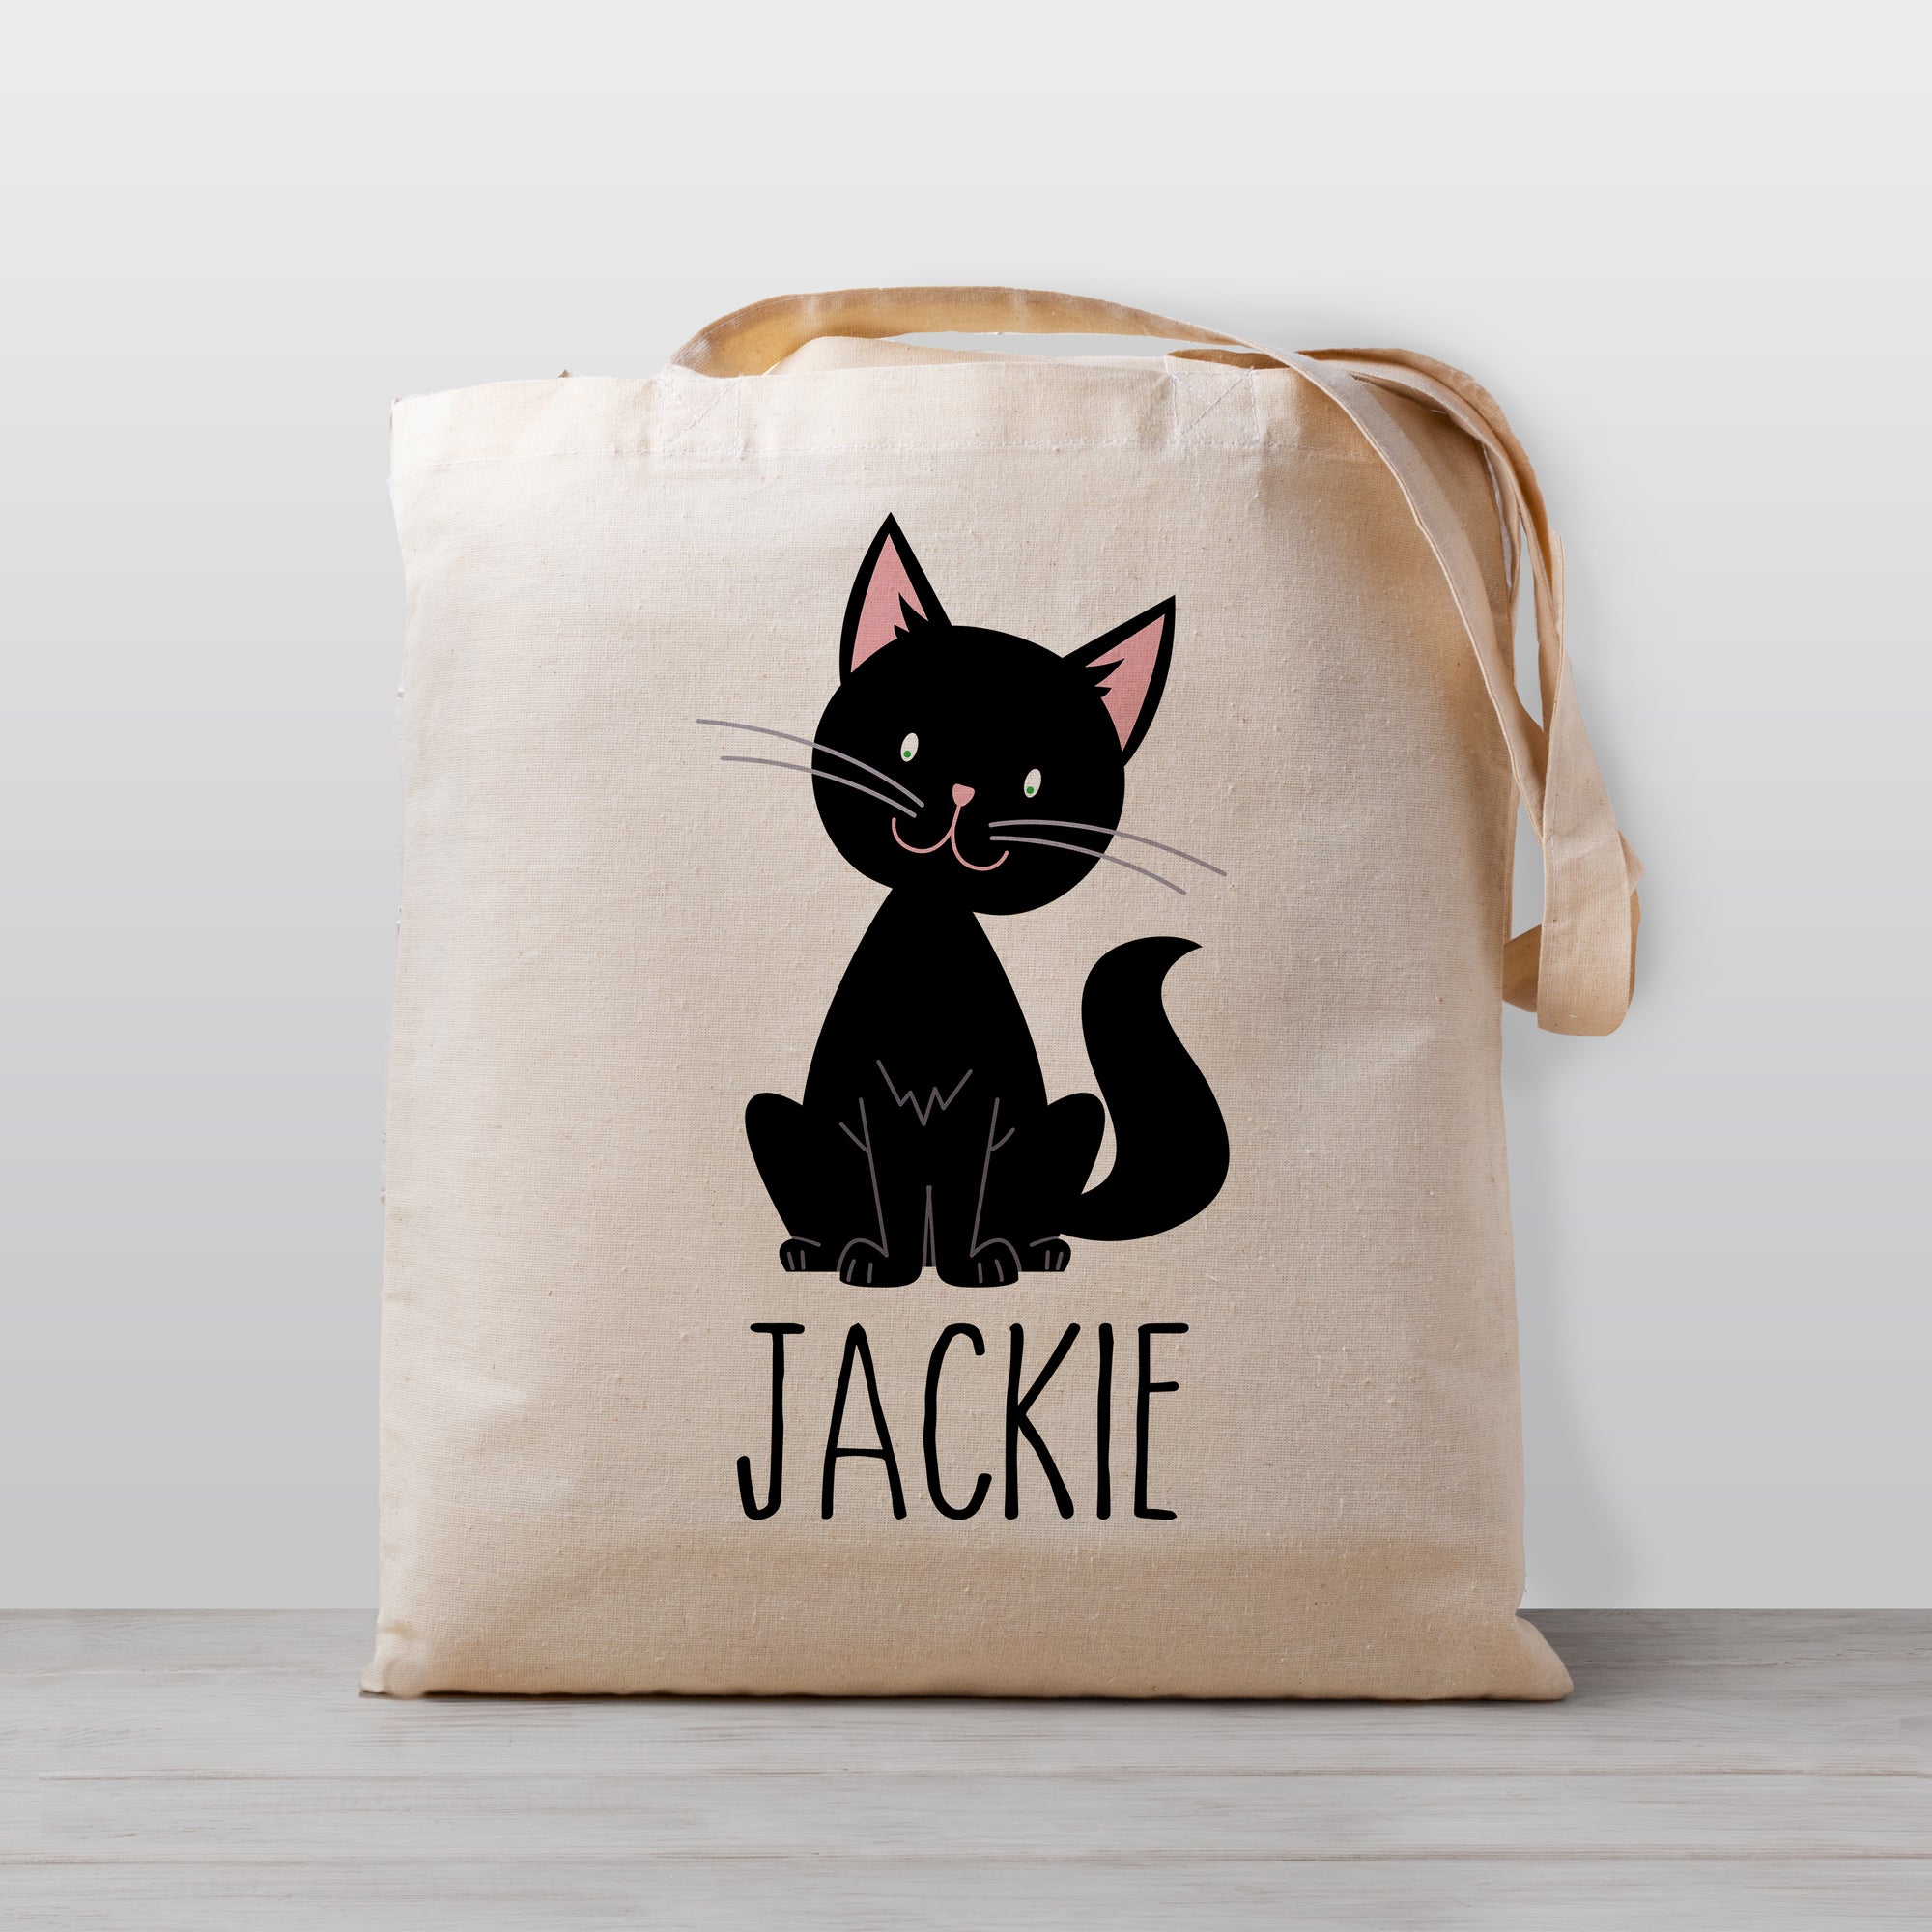 Black cat personalized tote bag for kids, cute kitten, 100% natural cotton canvas, for boys or girls, gender neutral